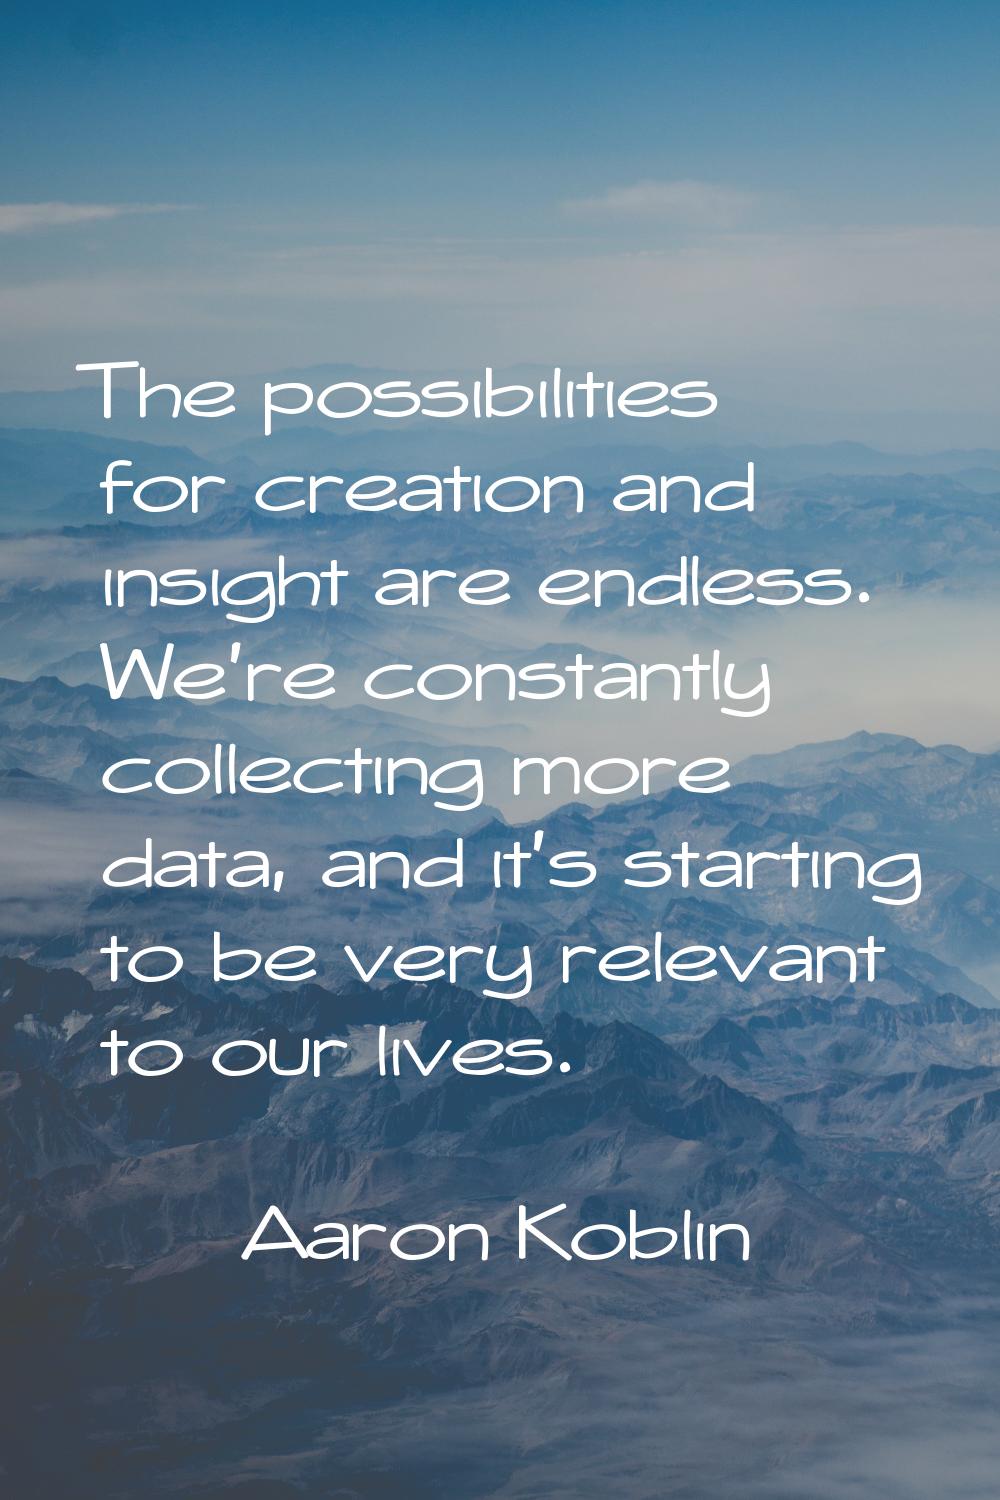 The possibilities for creation and insight are endless. We're constantly collecting more data, and 